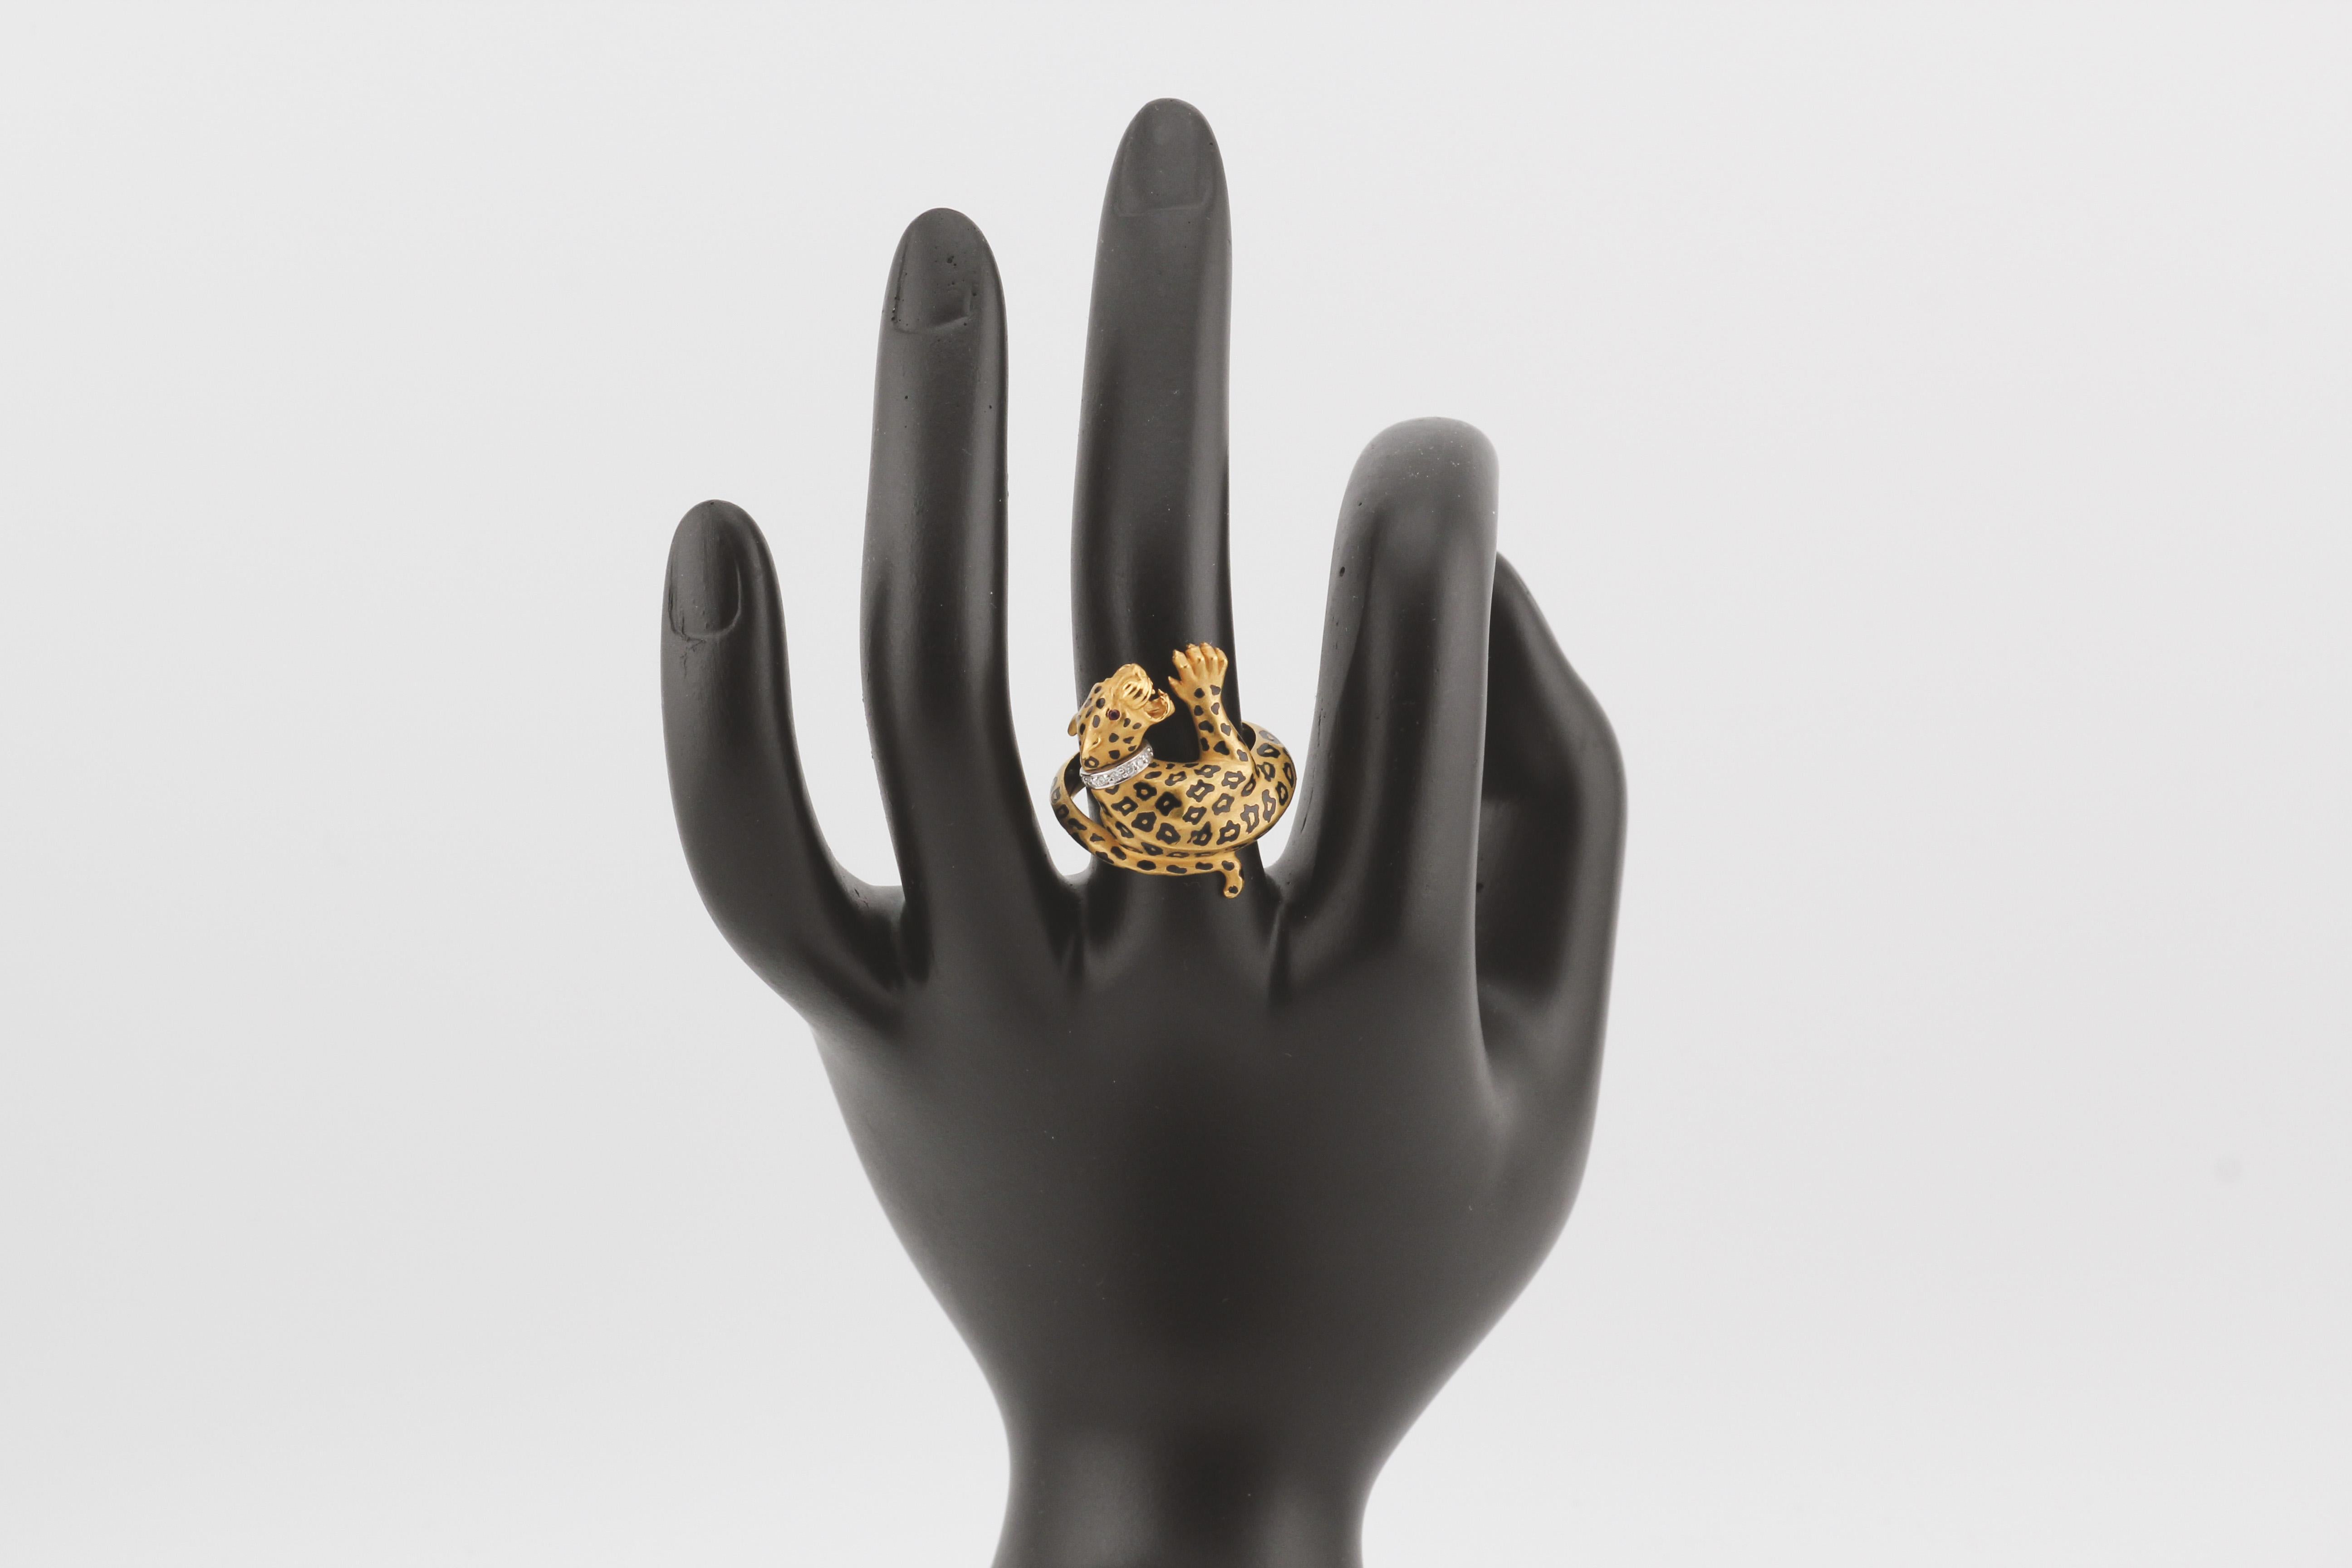 Introducing the Carrera Y Carrera 18K Yellow Gold Wrap Around Panther Ring—a symbol of untamed elegance and meticulous craftsmanship that brings to life the dynamic spirit of the panther. Crafted by the esteemed Spanish jeweler, Carrera Y Carrera,